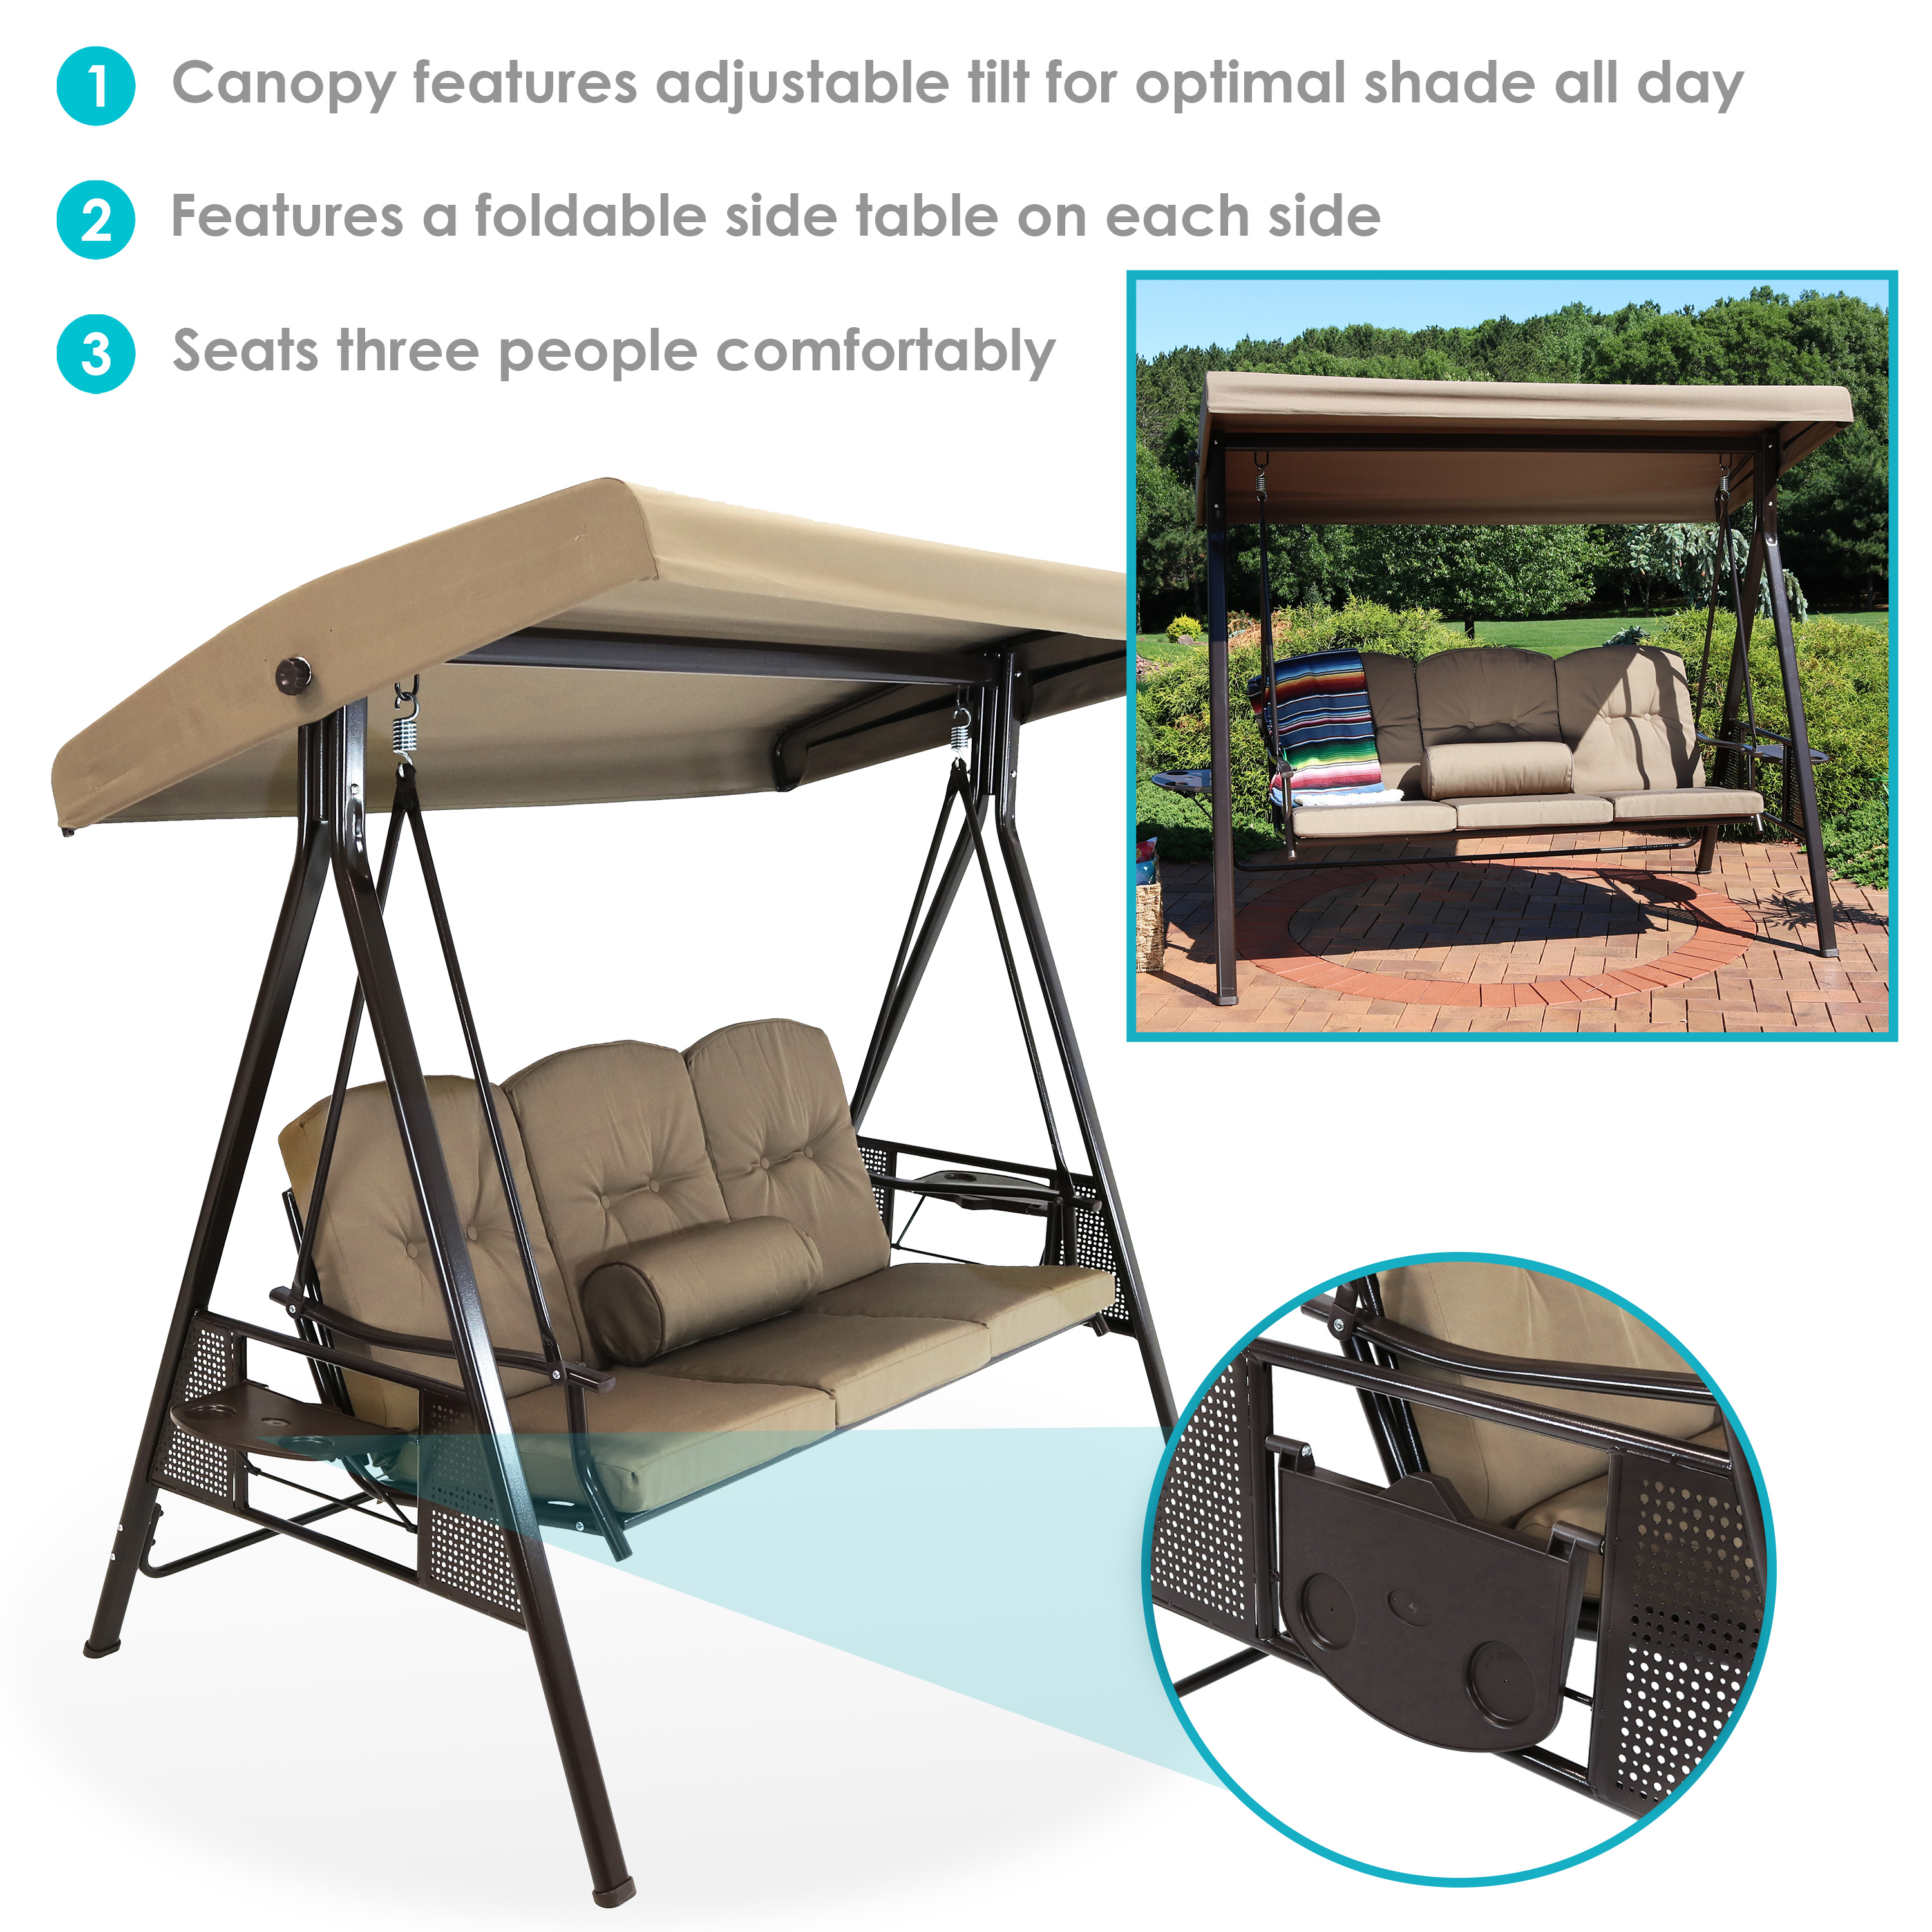 Sunnydaze 3-Person Patio Swing with Adjustable Canopy and Cushions - Beige - image 4 of 9